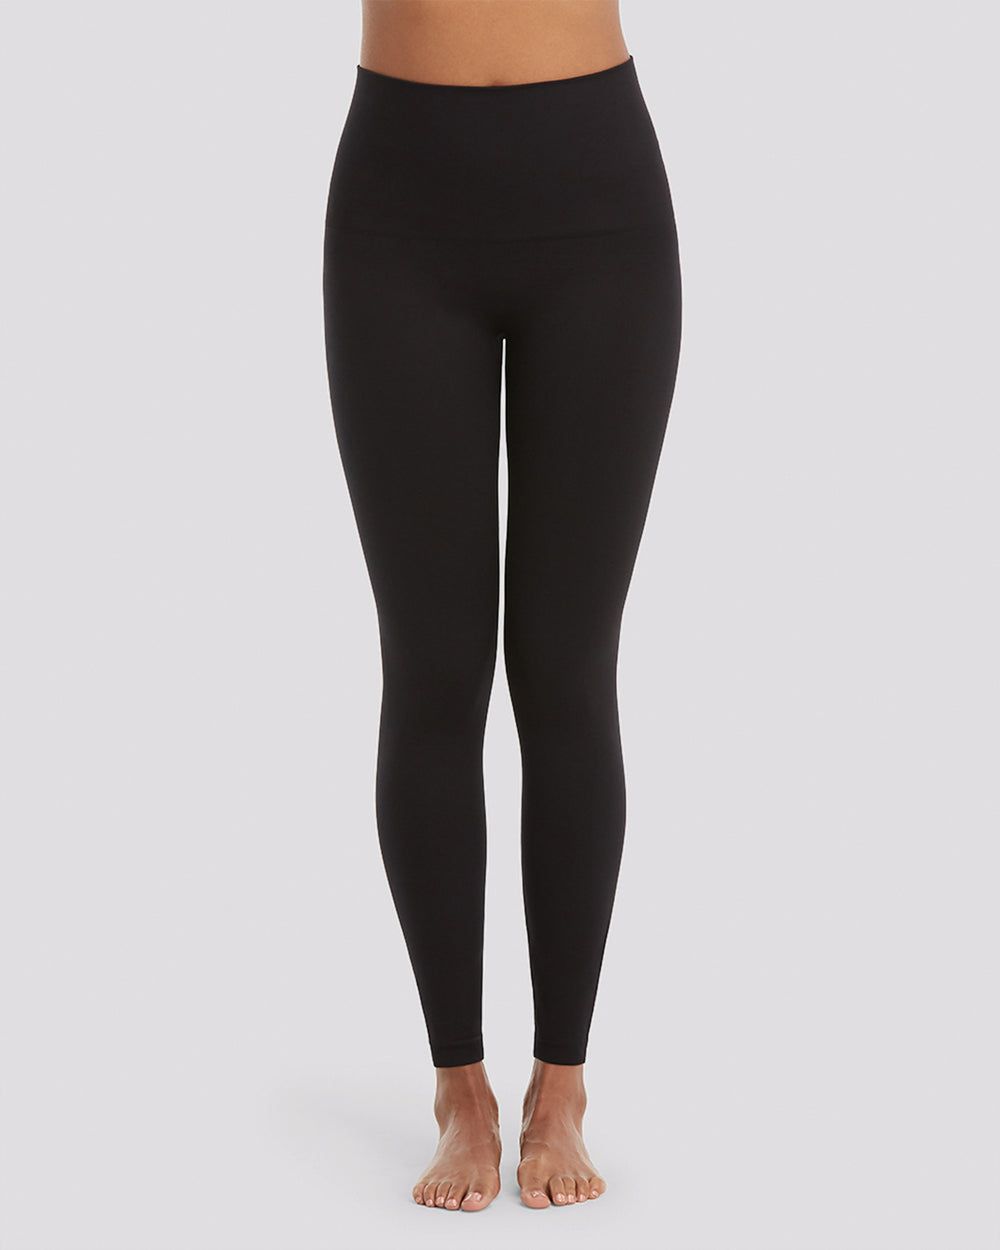 The Ododos tummy-control leggings are my go-to pants this fall